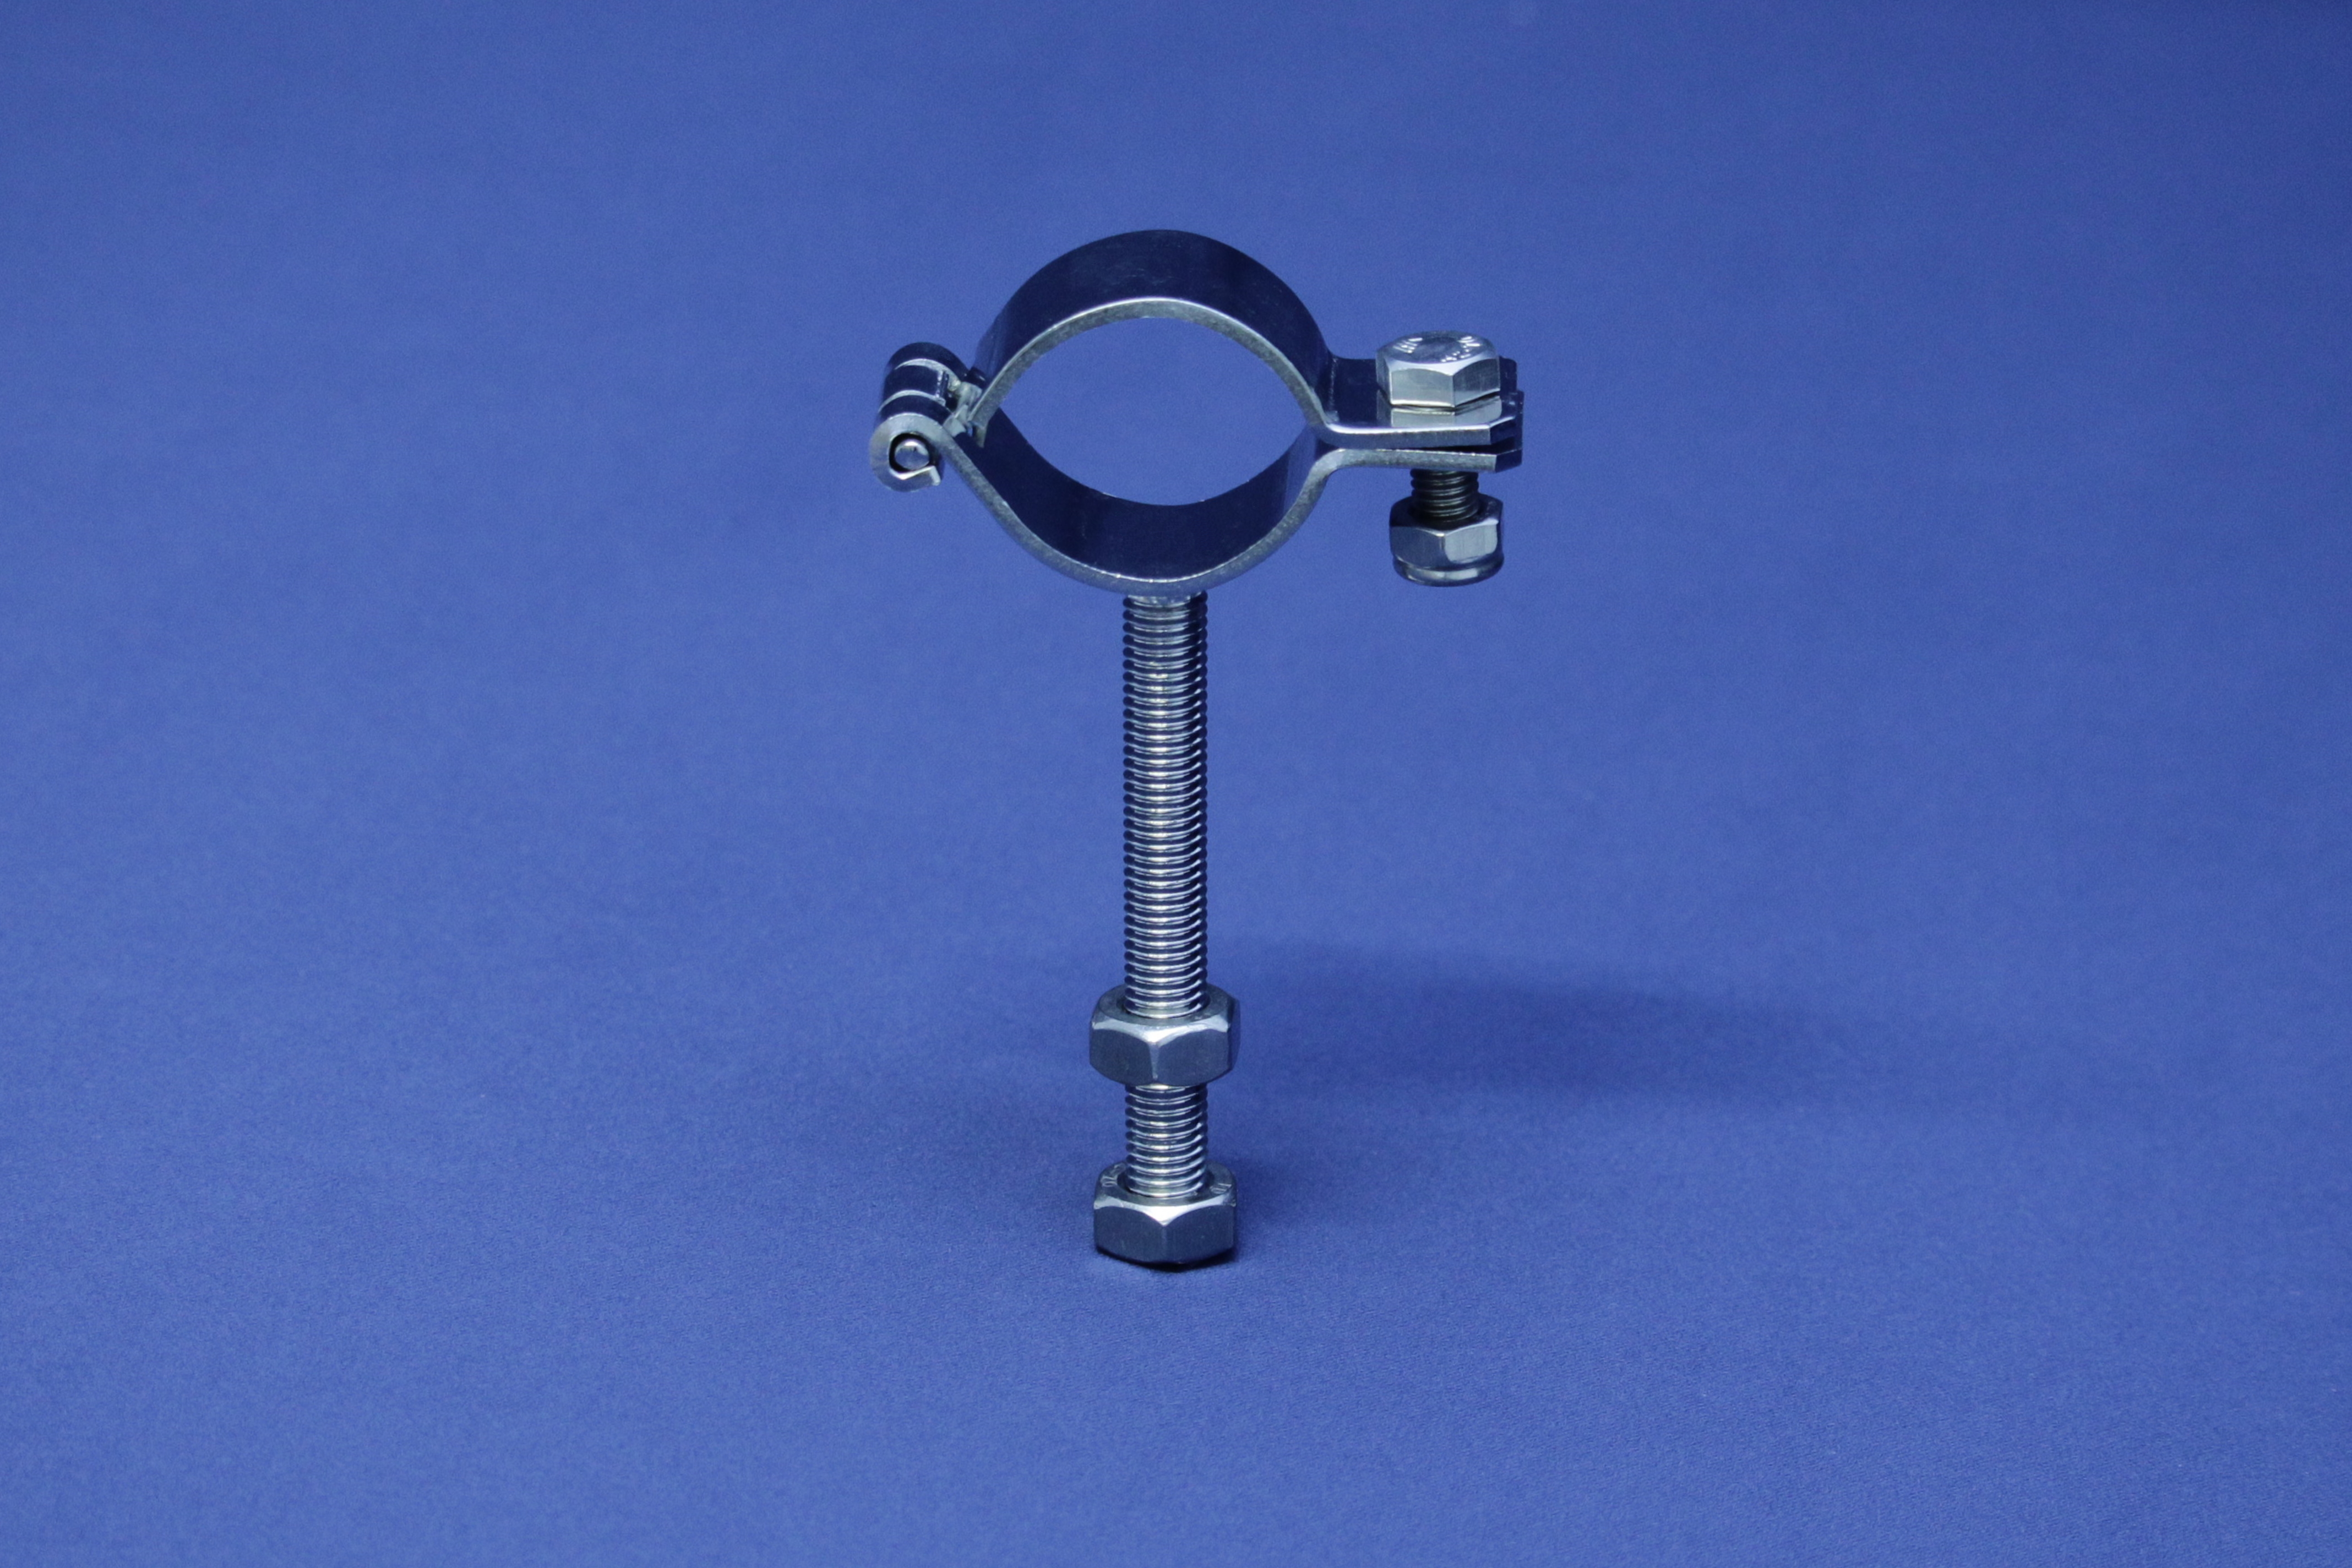 PIPE CLAMP HINGED DN 65 304 POL. WITH THREADED SHANK